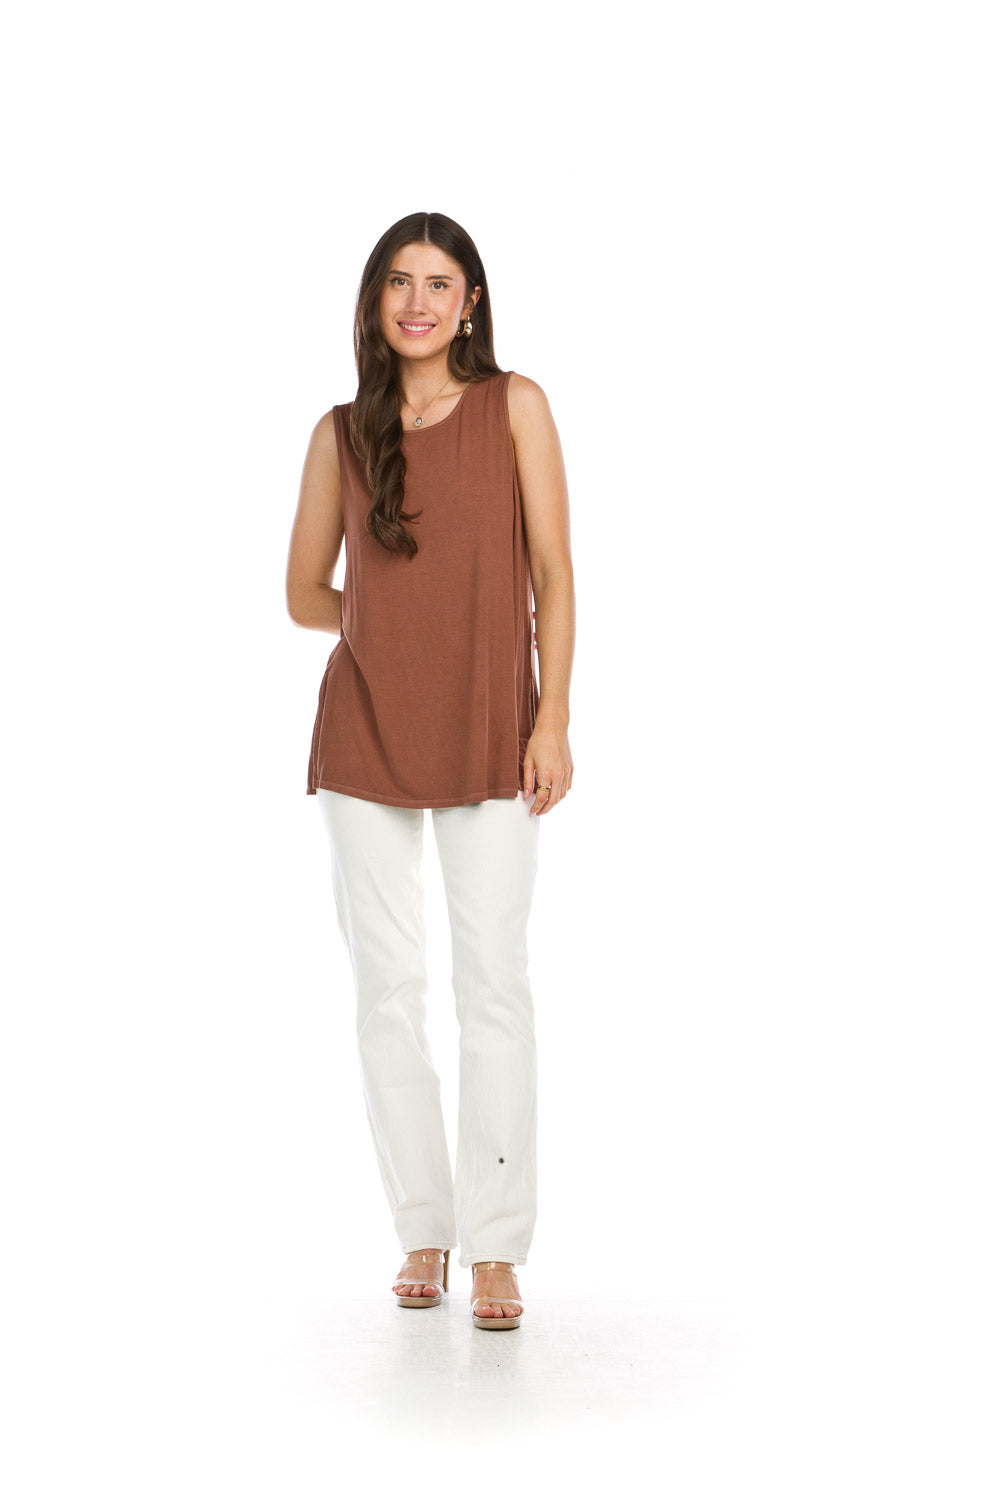 PT16128 MOCHA Bamboo Knit Classic Flowy Tank Top with Side Slit